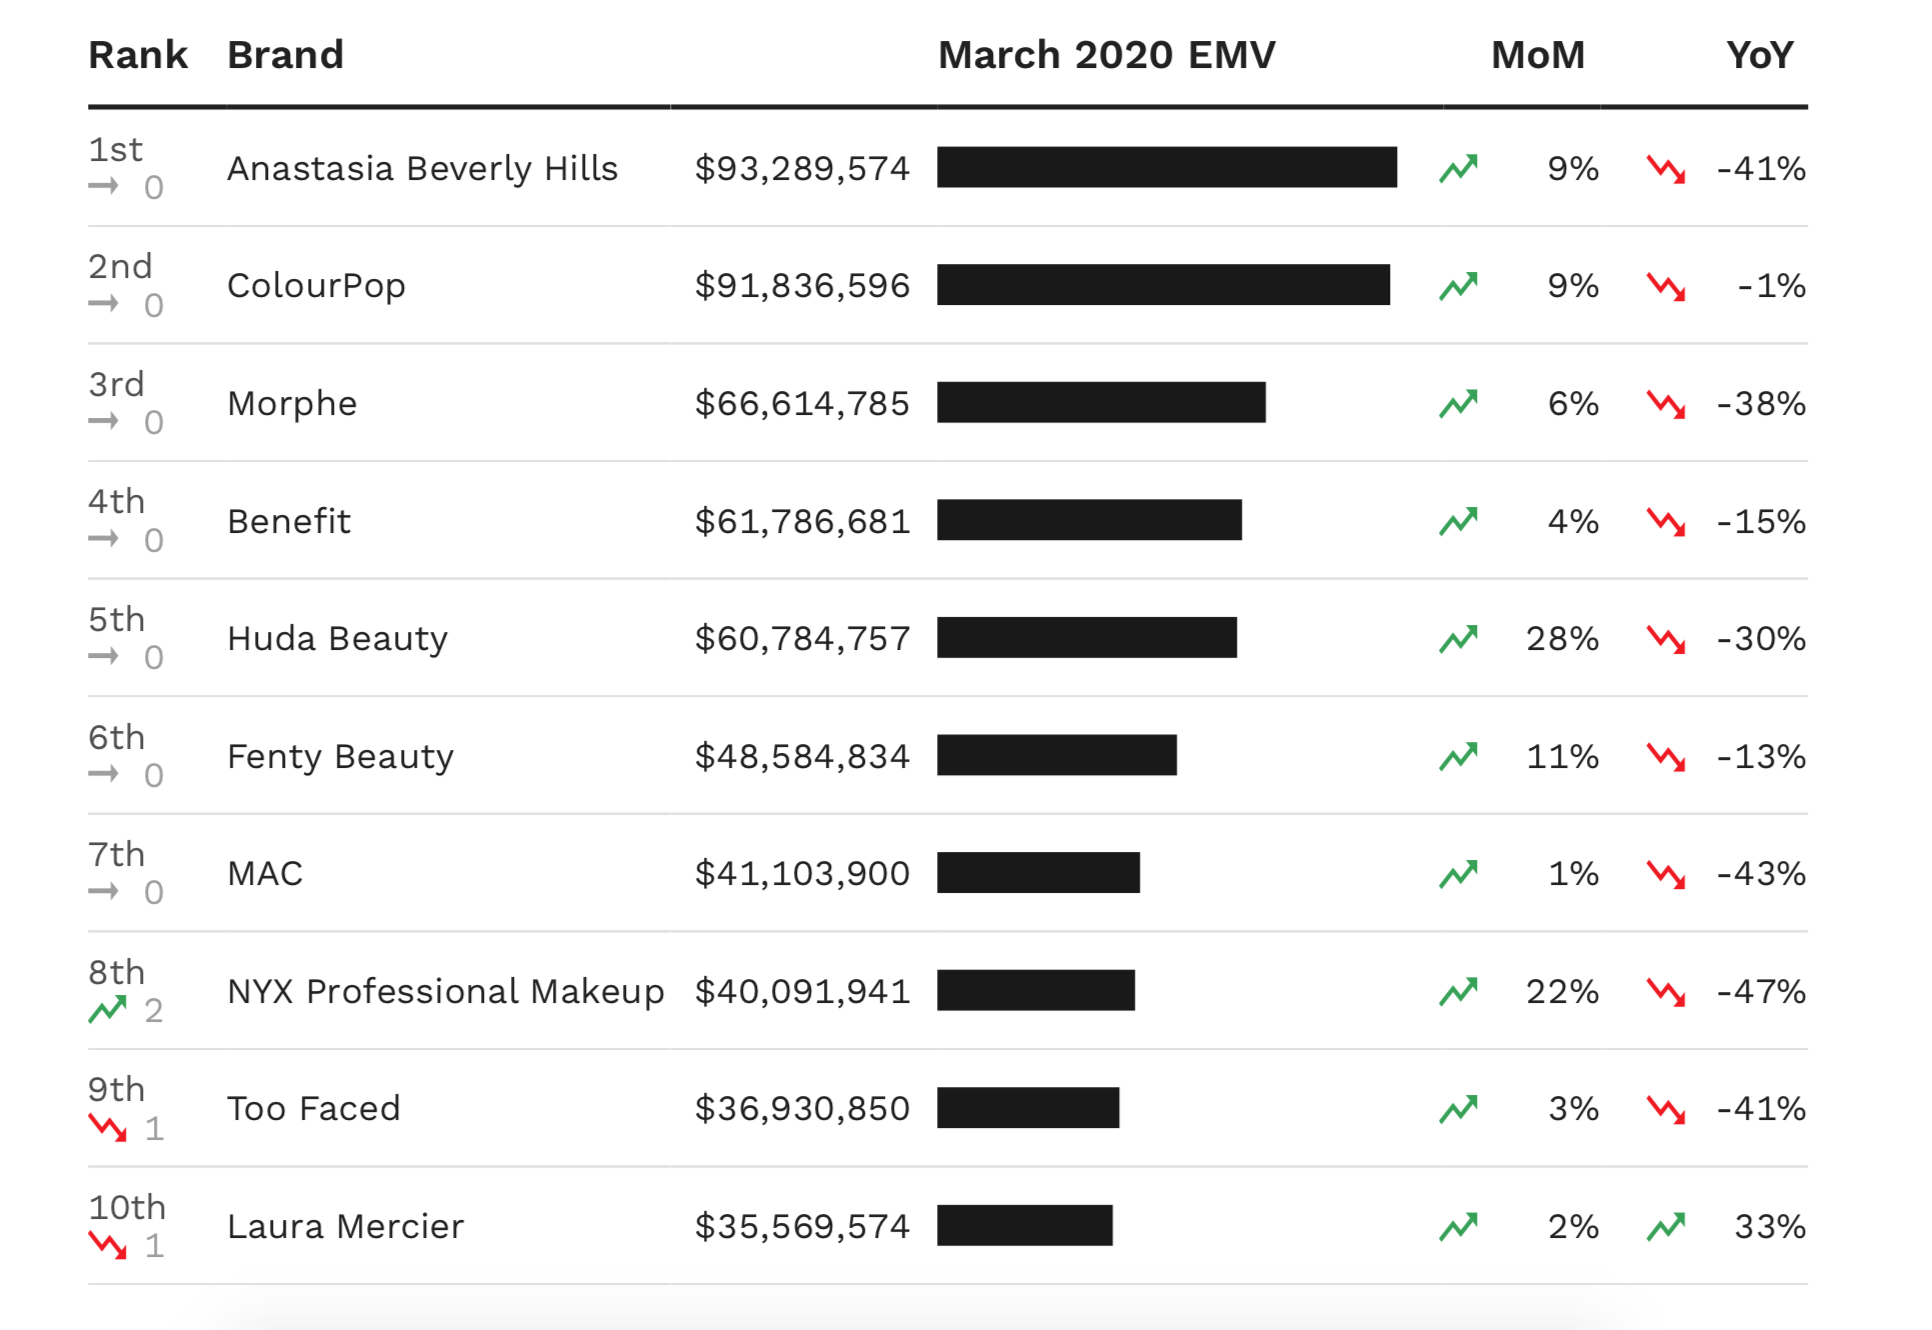 A chart showing the top 10 cosmetics brands in the U.S. by March EMV performance.